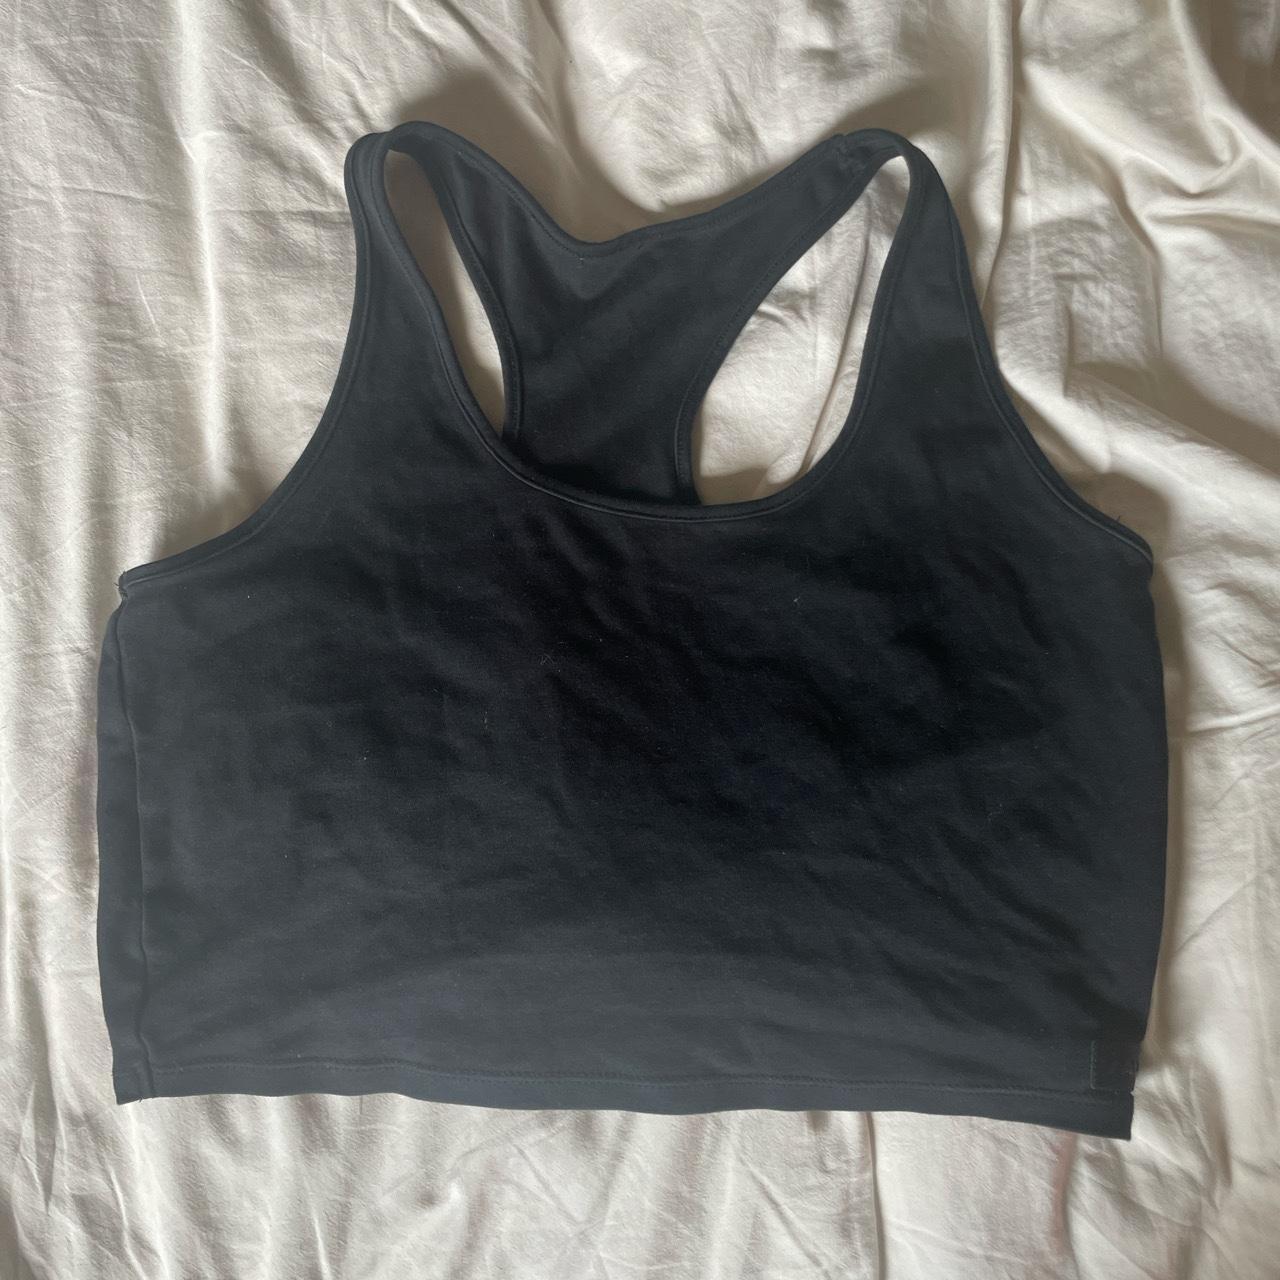 Alphalete cropped top with open back Size xs - Depop